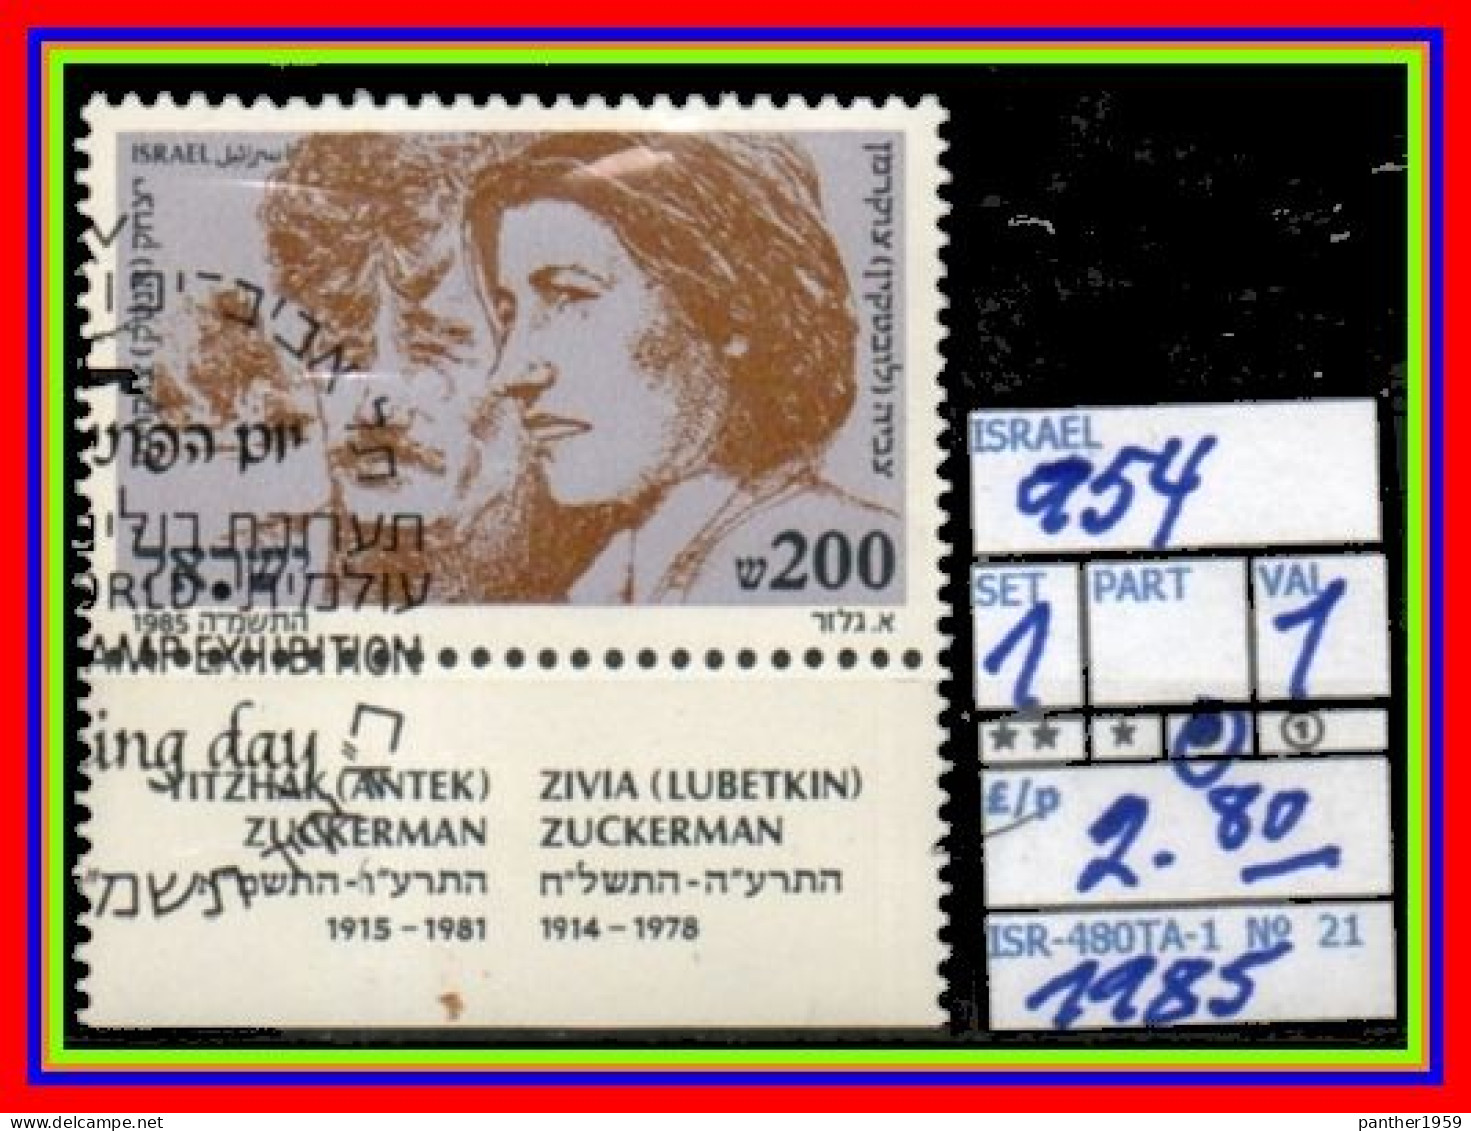 ASIA# ISRAEL# #COMMEMORATIVE SERIES WITH TABS# USED# (ISR-280TA-1) (21) - Used Stamps (with Tabs)